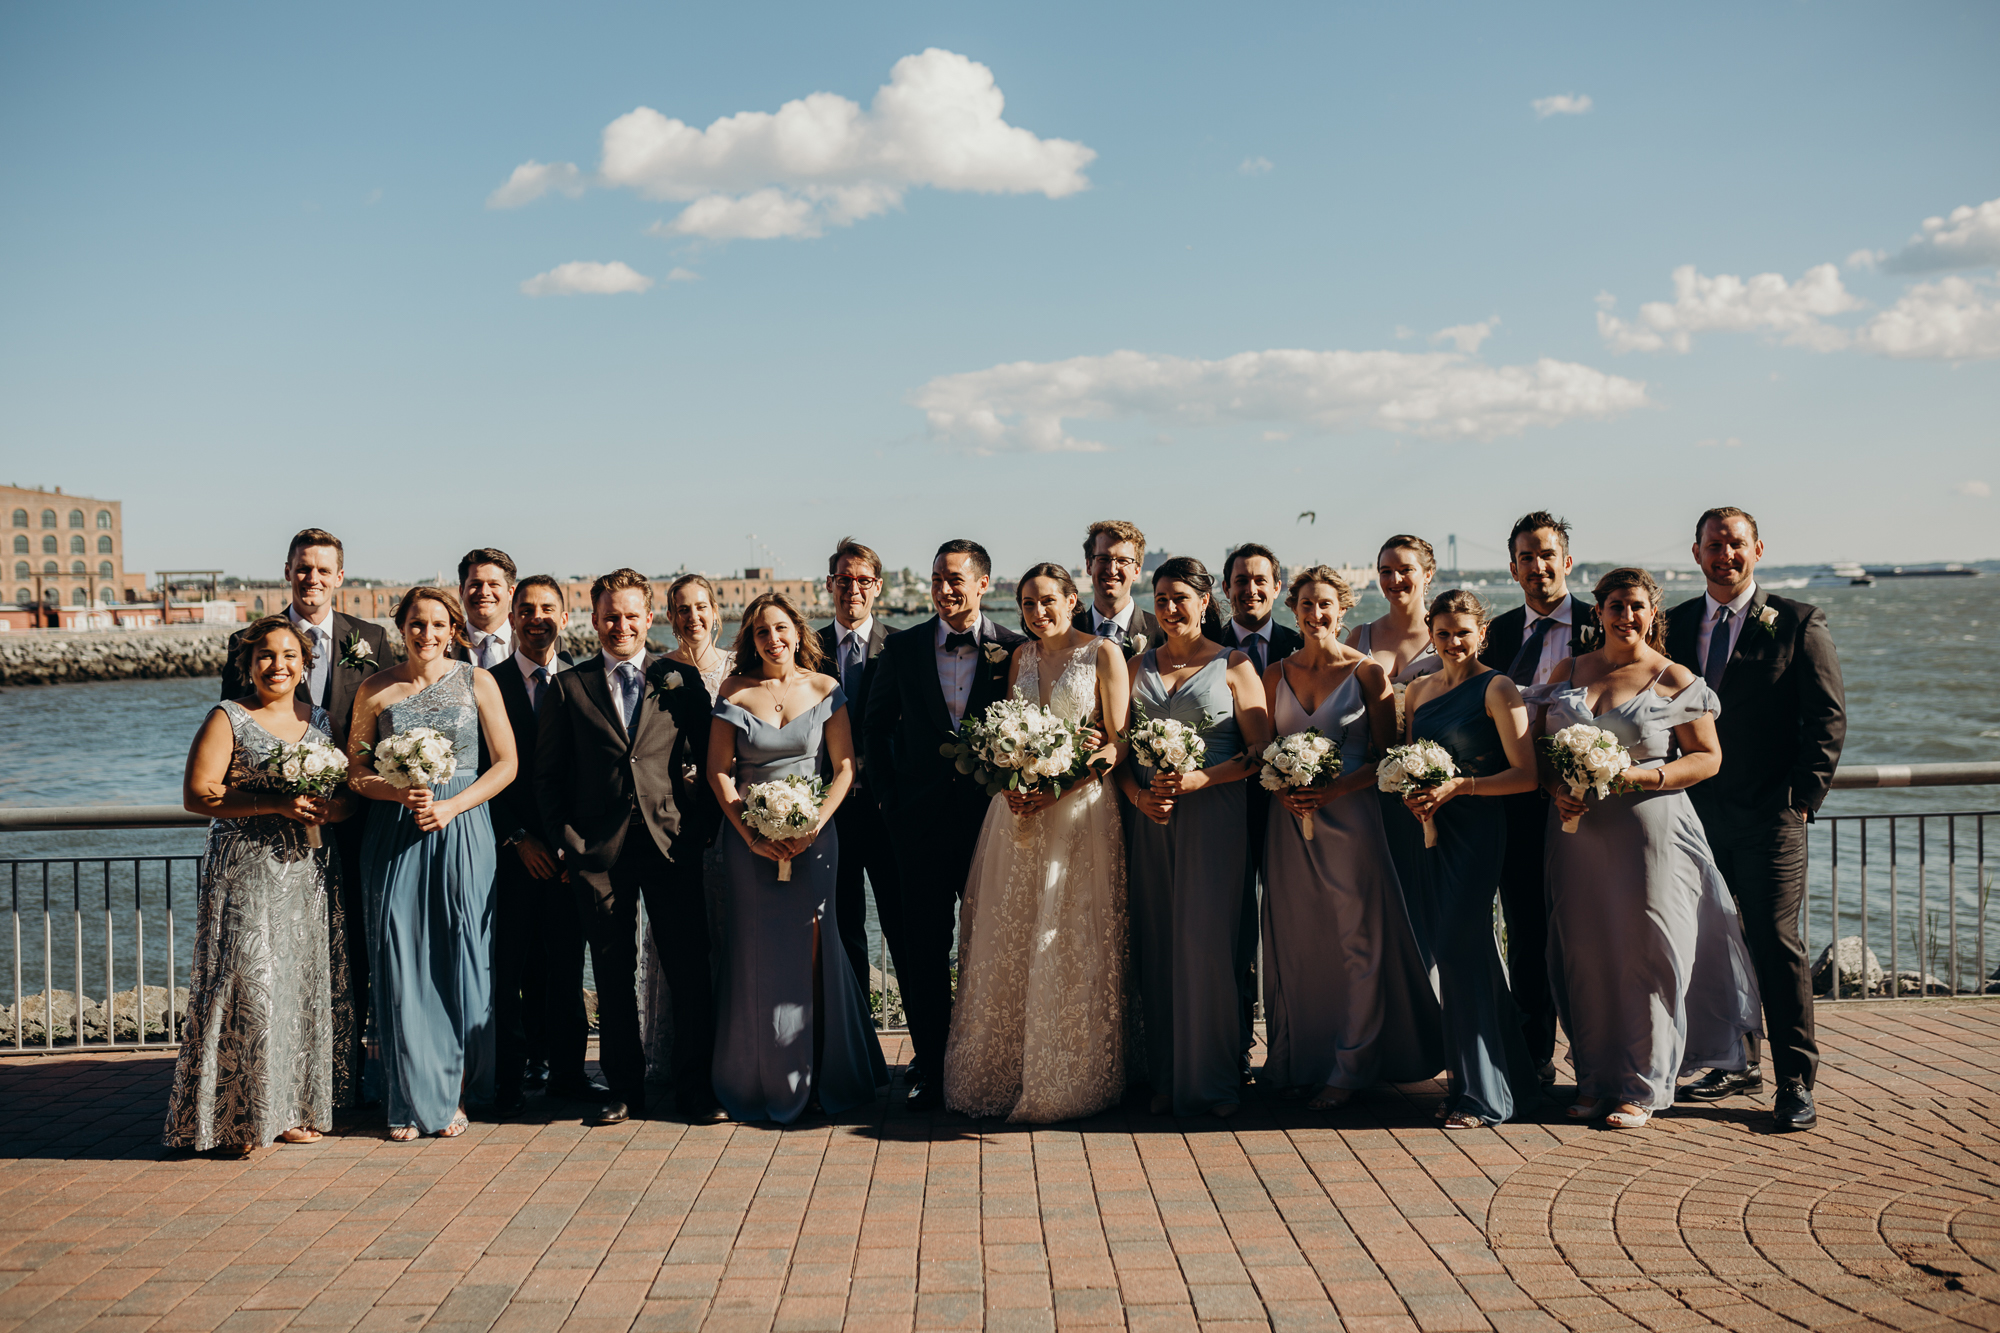 a portrait of a wedding party at liberty warehouse in brooklyn, new york city